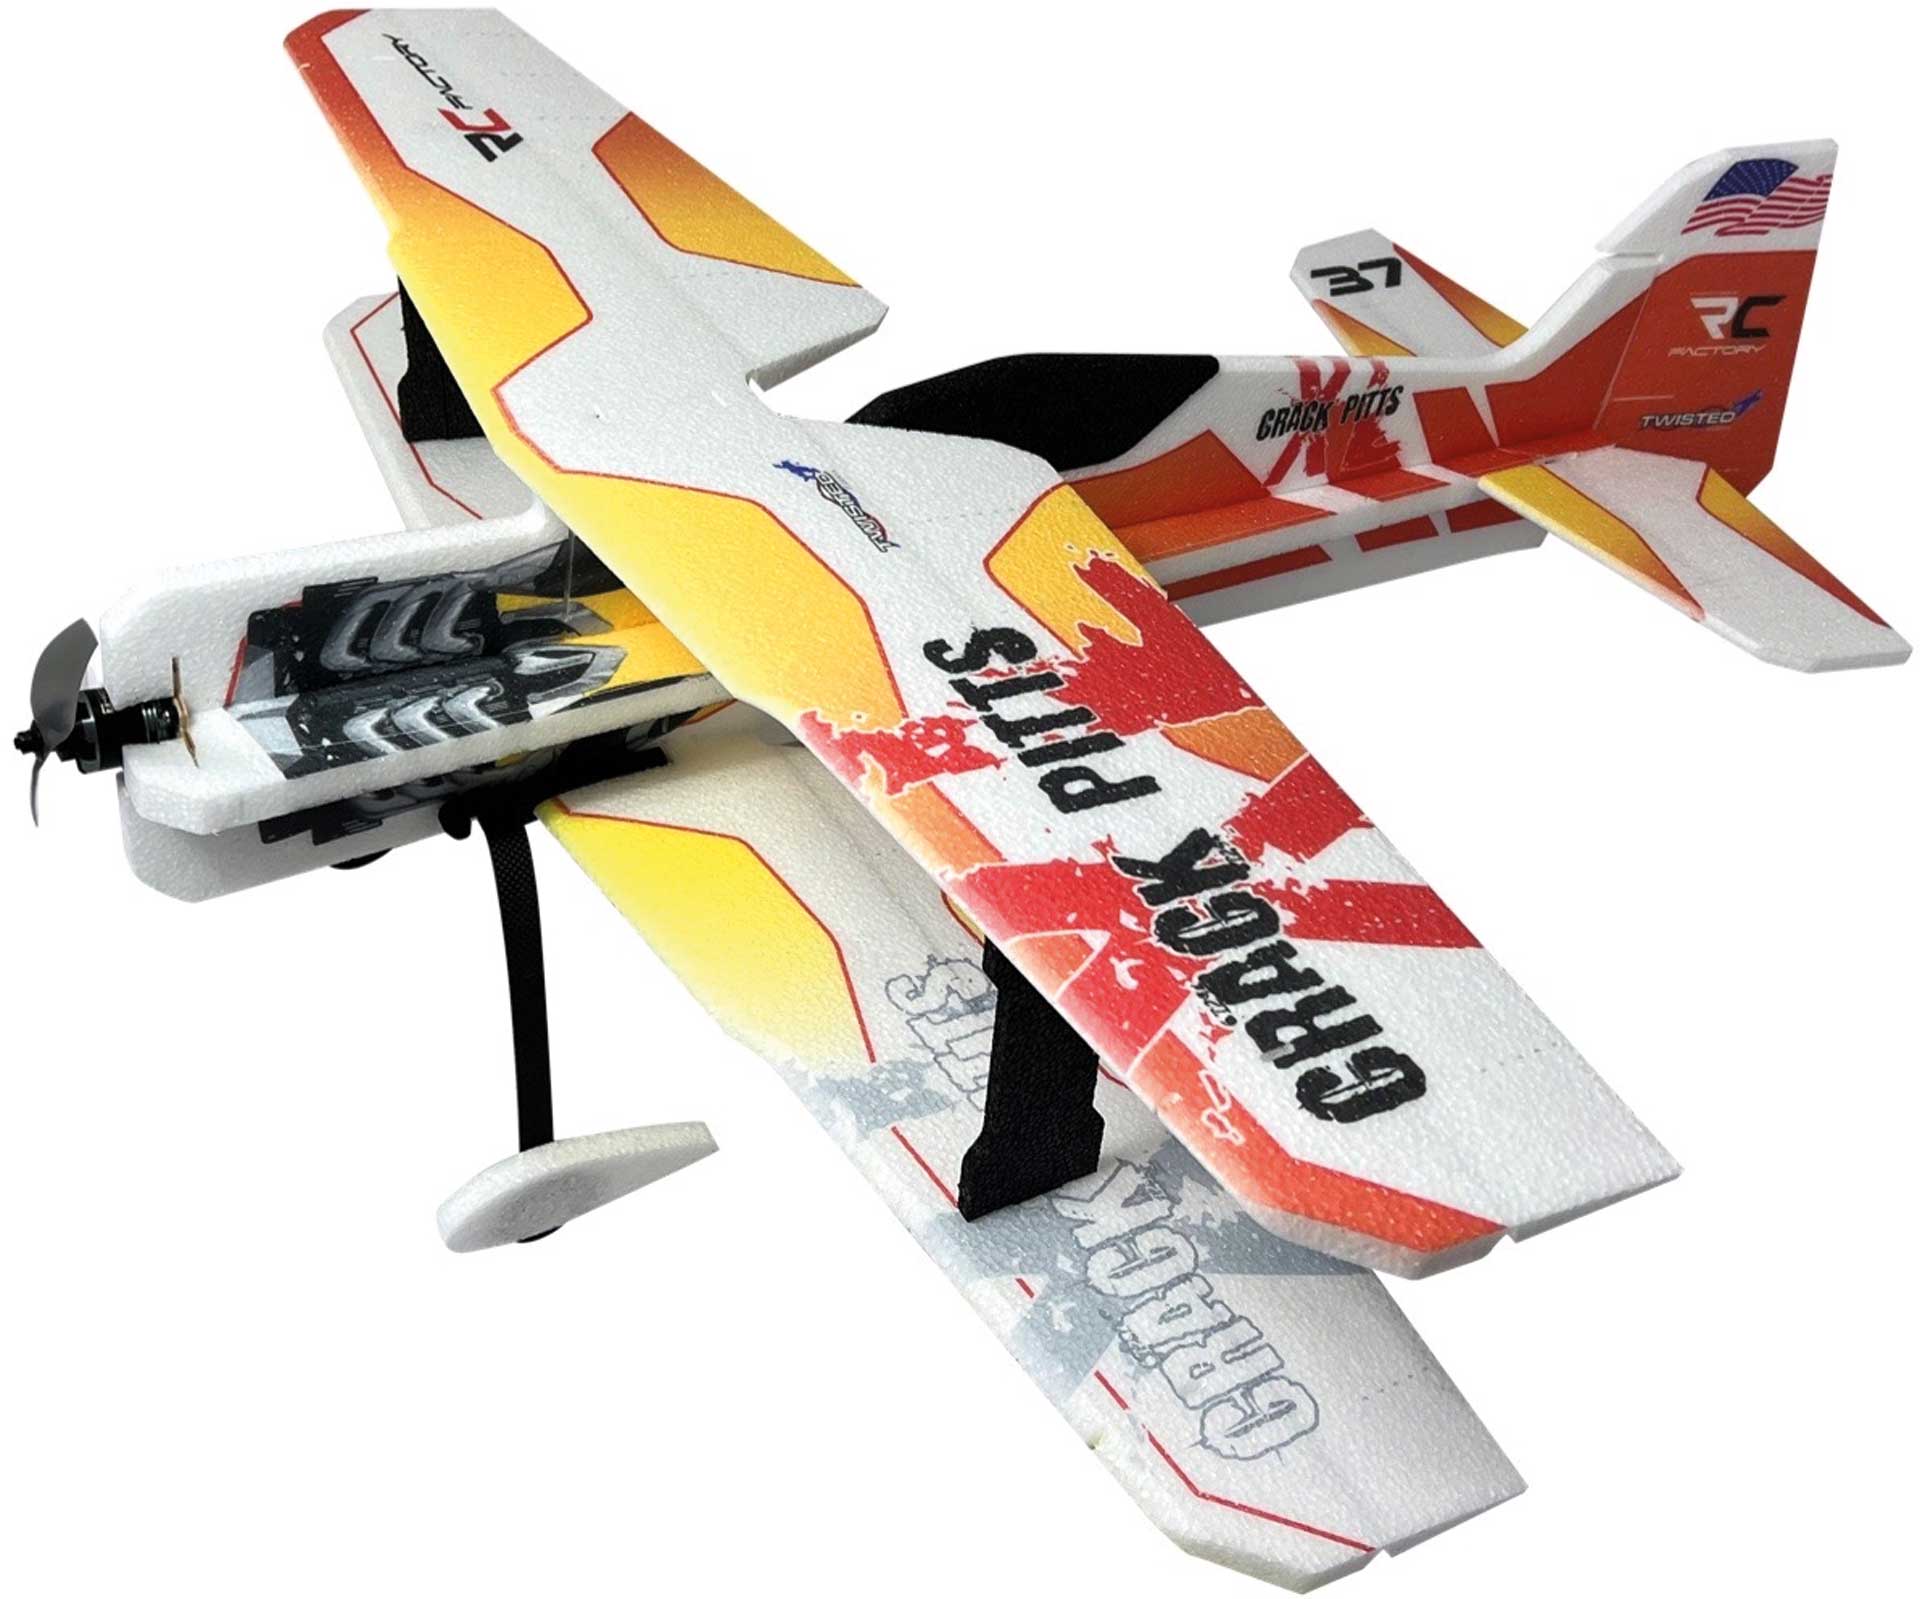 RC-Factory Crack Pitts XL Yellow EXPERT series